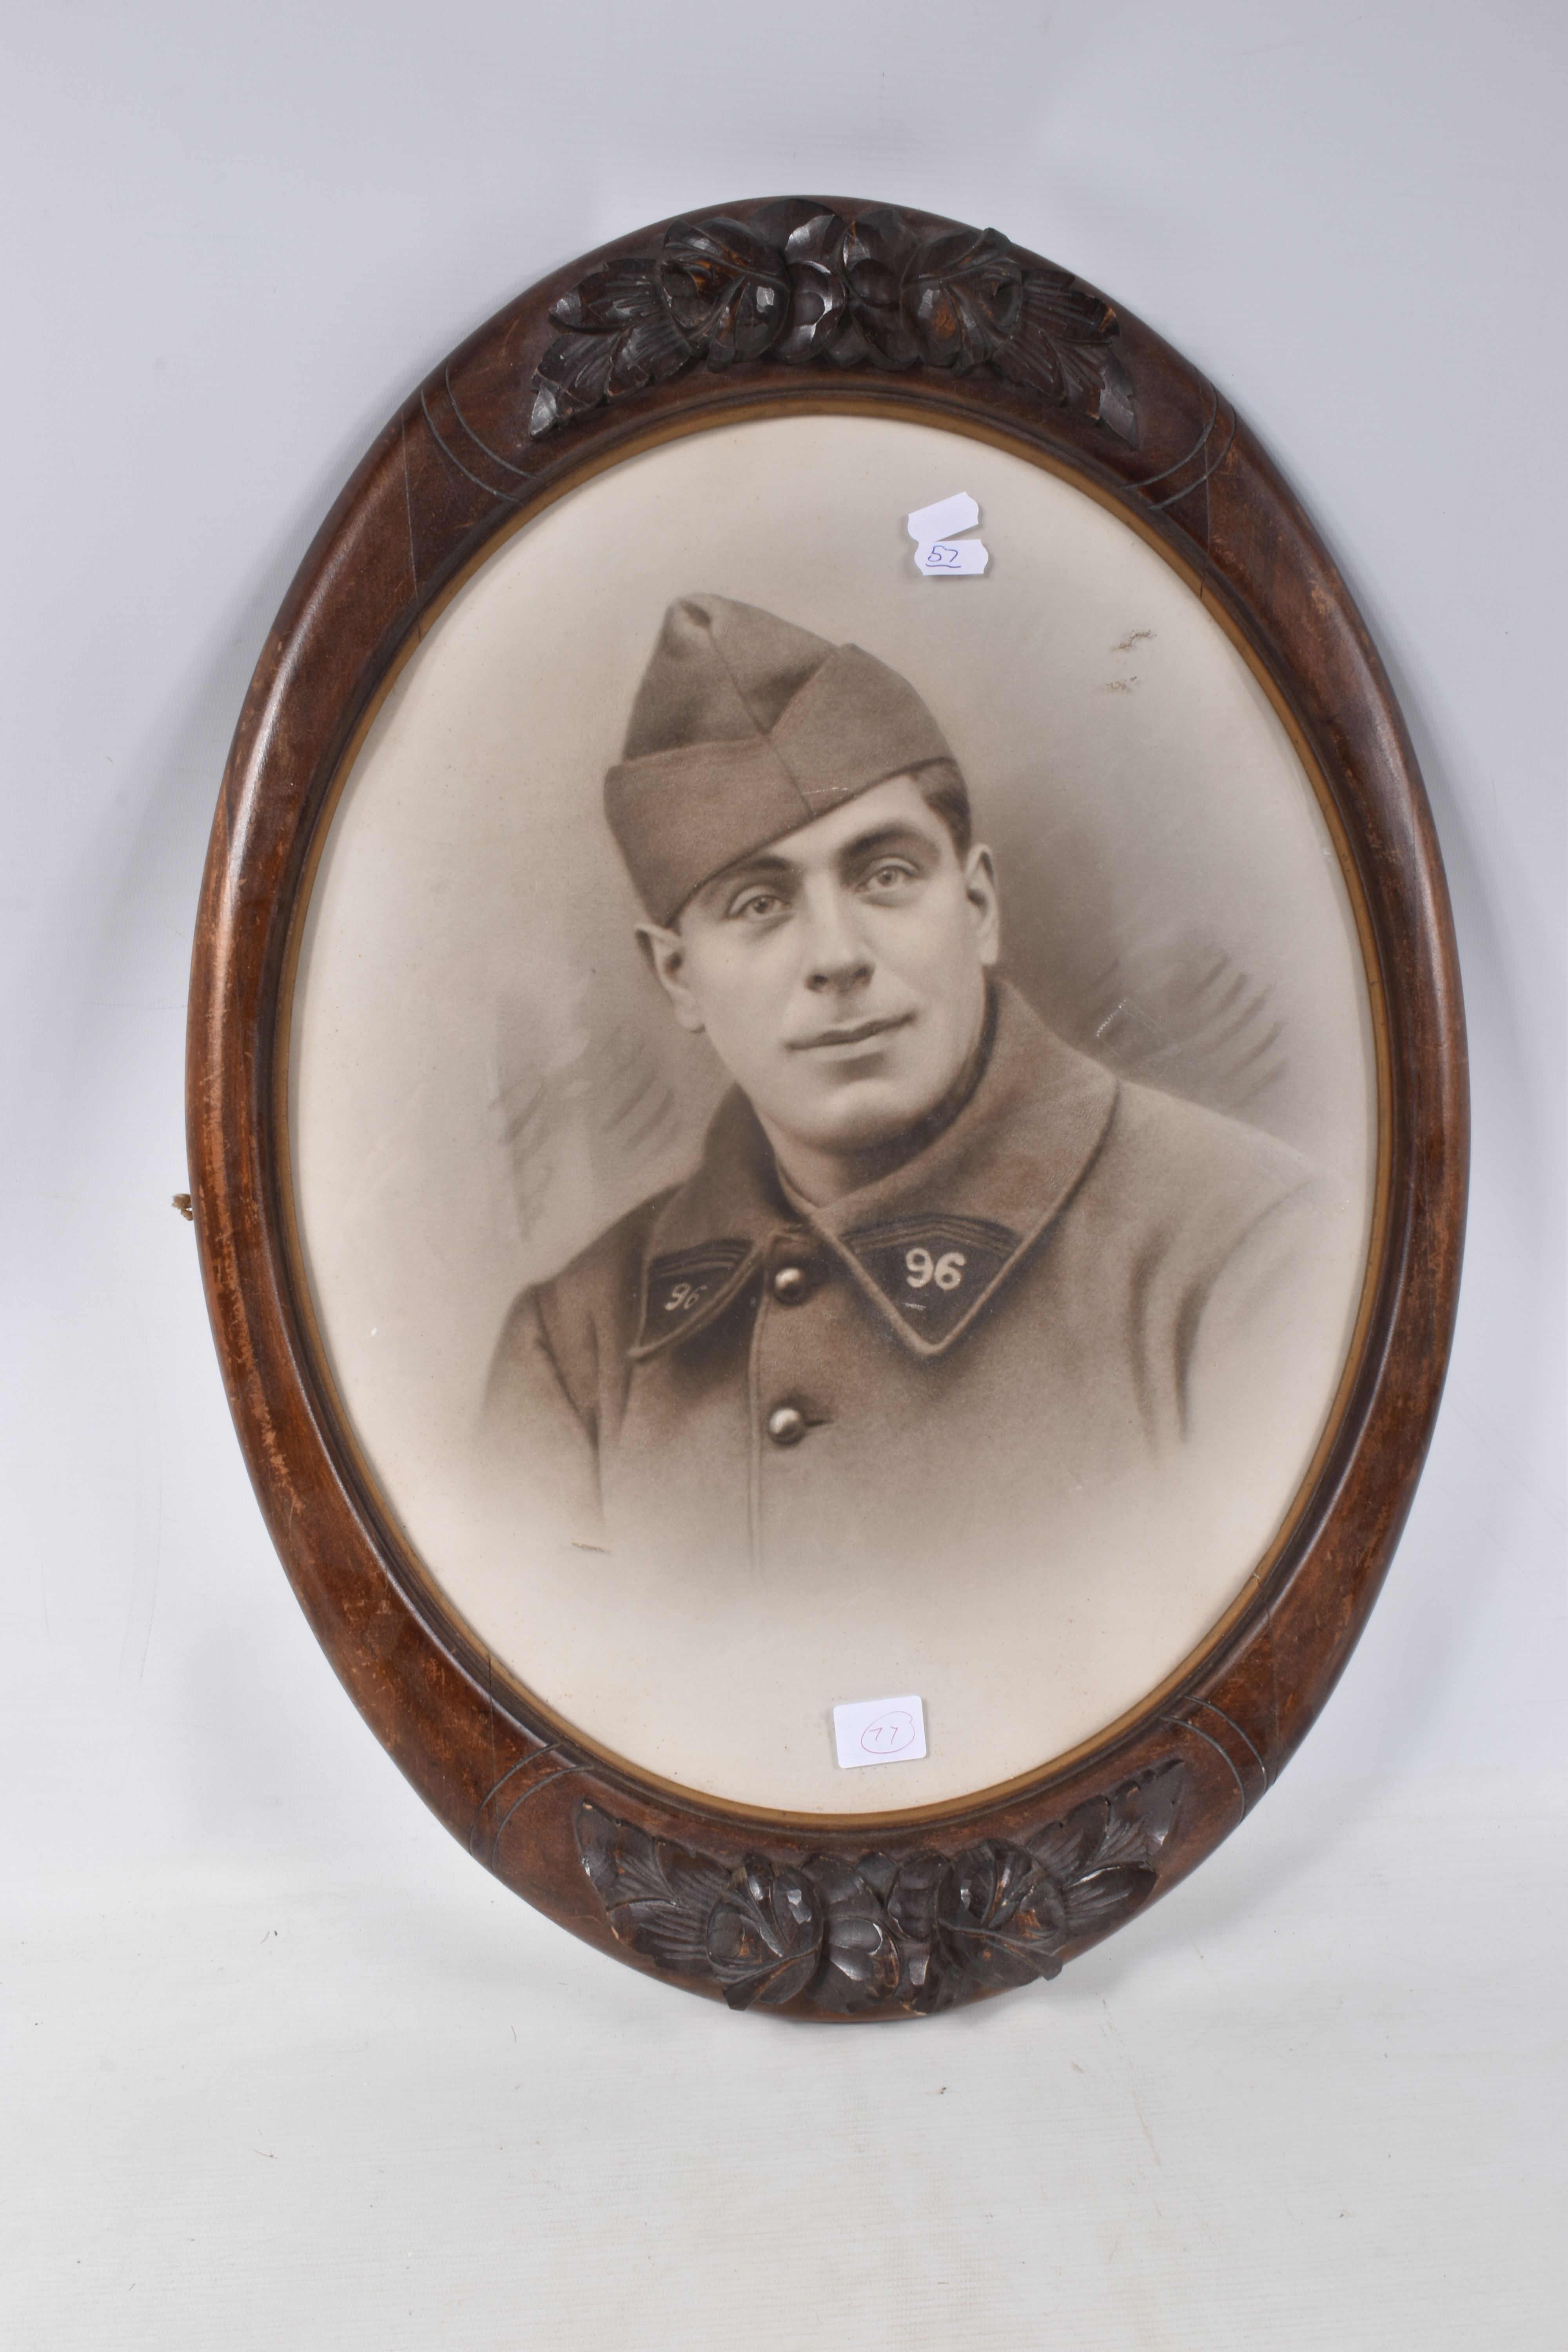 A FRAMED PHOTO OF A FRENCH SOLDIER, the picture is in a carved wooden frame and features a French